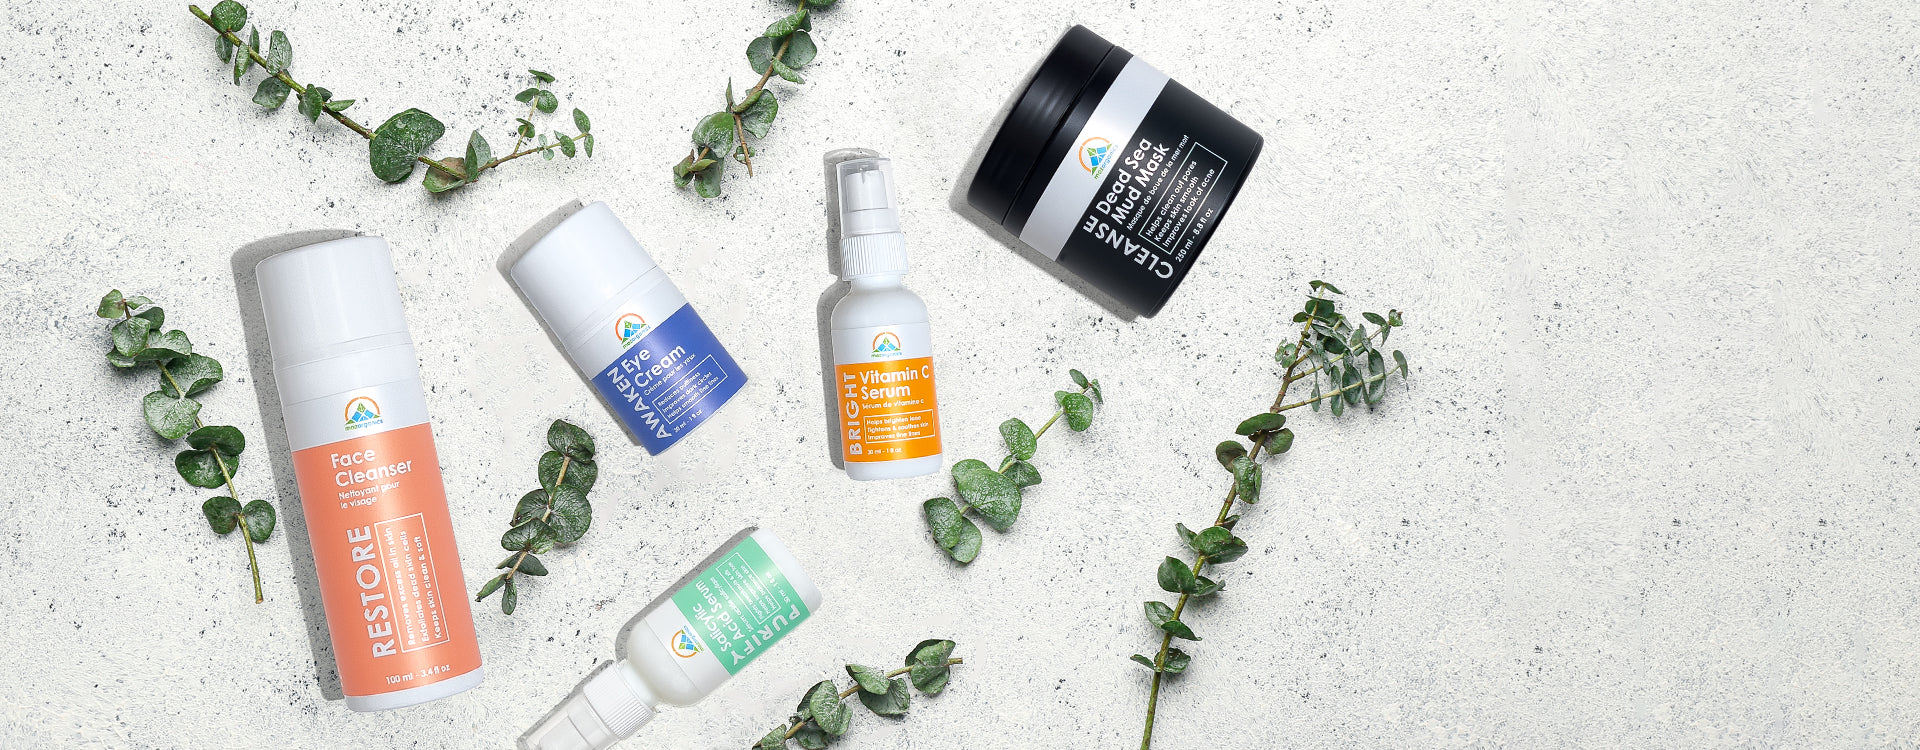 My Organic Zone: Achieve Radiant and Even-Toned Skin with Organic Care